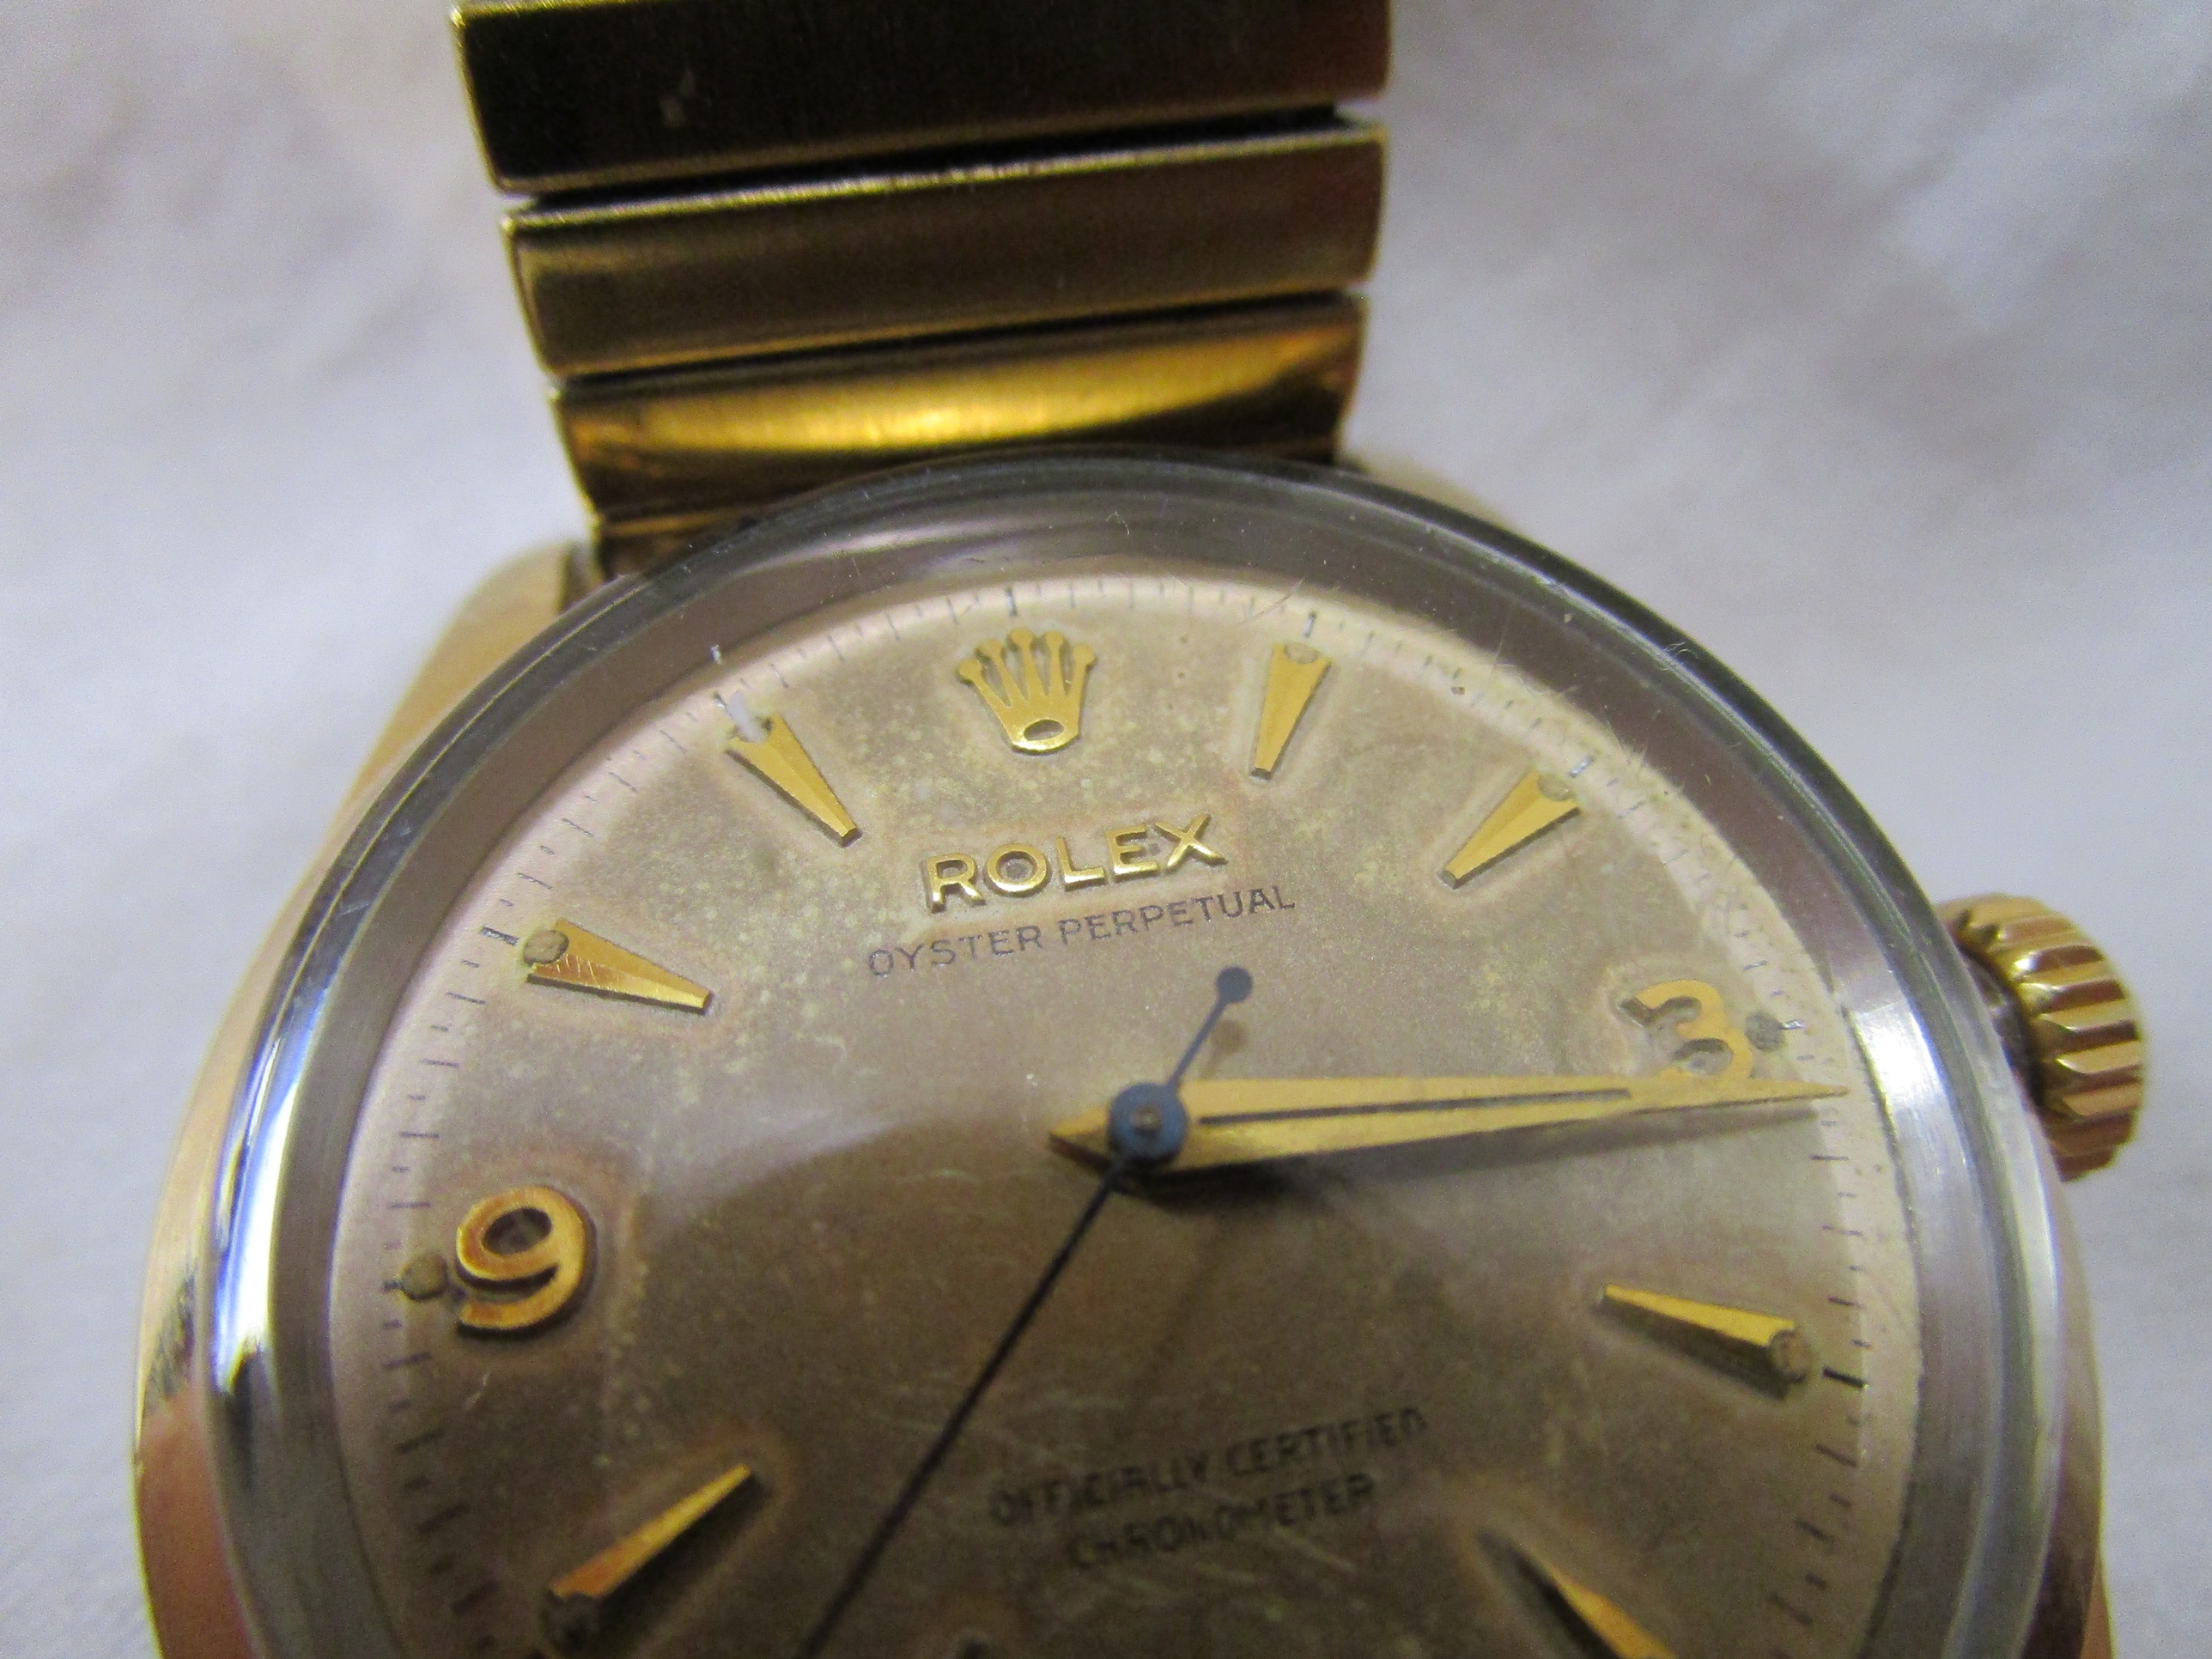 Rolex Oyster Perpetual working gents watch - 1967 model 6634 - Image 5 of 12